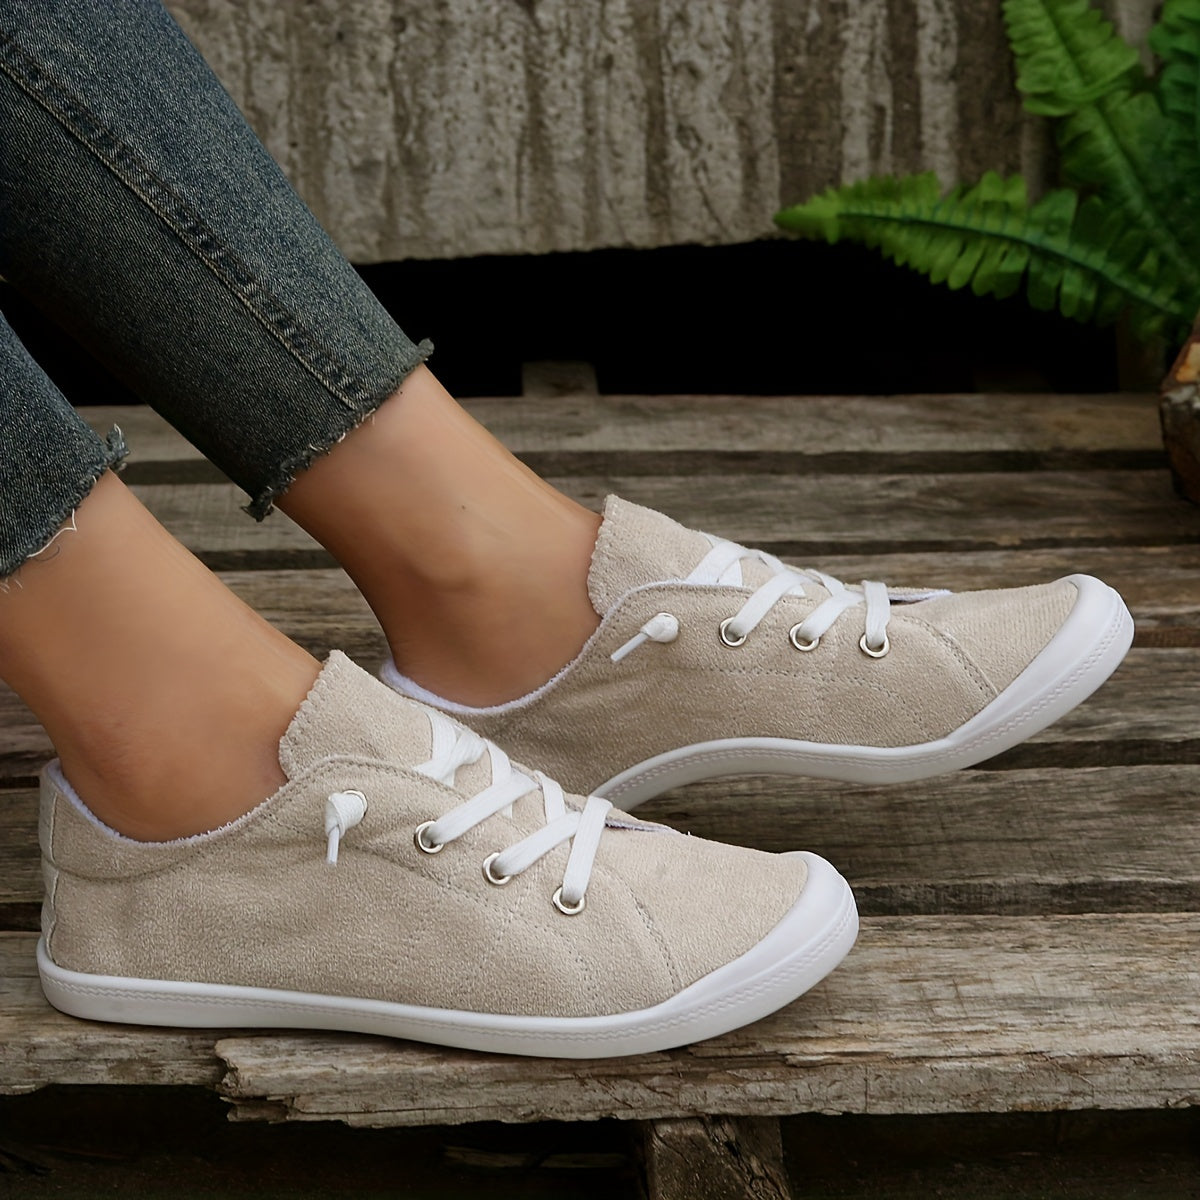 Solid Color Flat Canvas Shoes, Casual Lace Up Sneakers